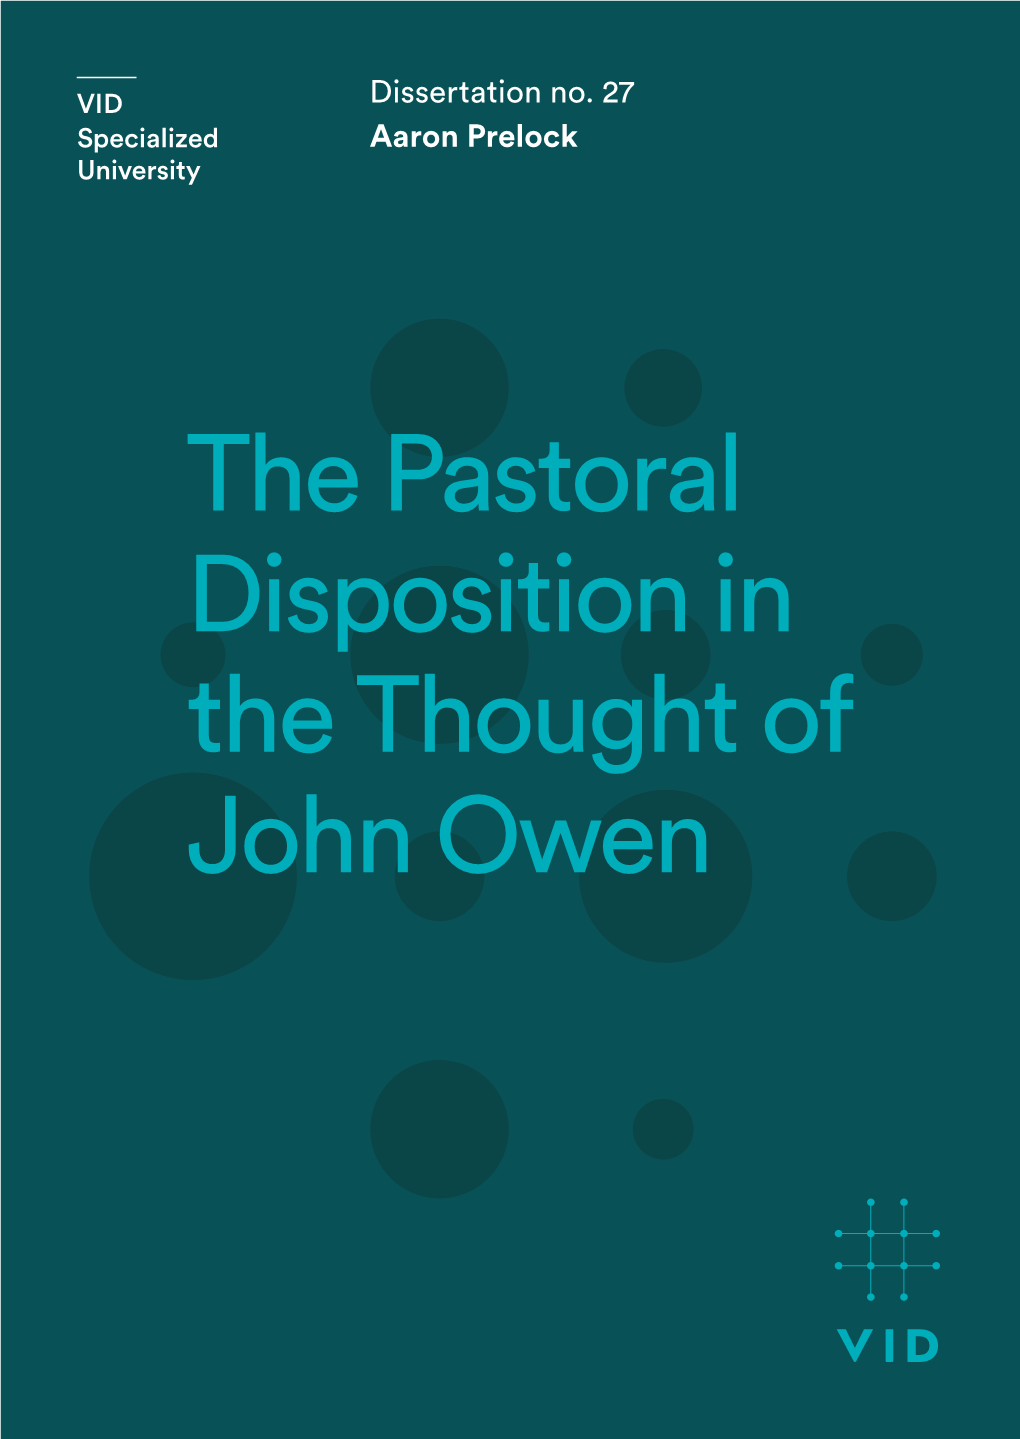 The Pastoral Disposition in the Thought of John Owen the Pastoral Disposition in the Thought of John Owen the PASTORAL DISPOSITION in the THOUGHT OF